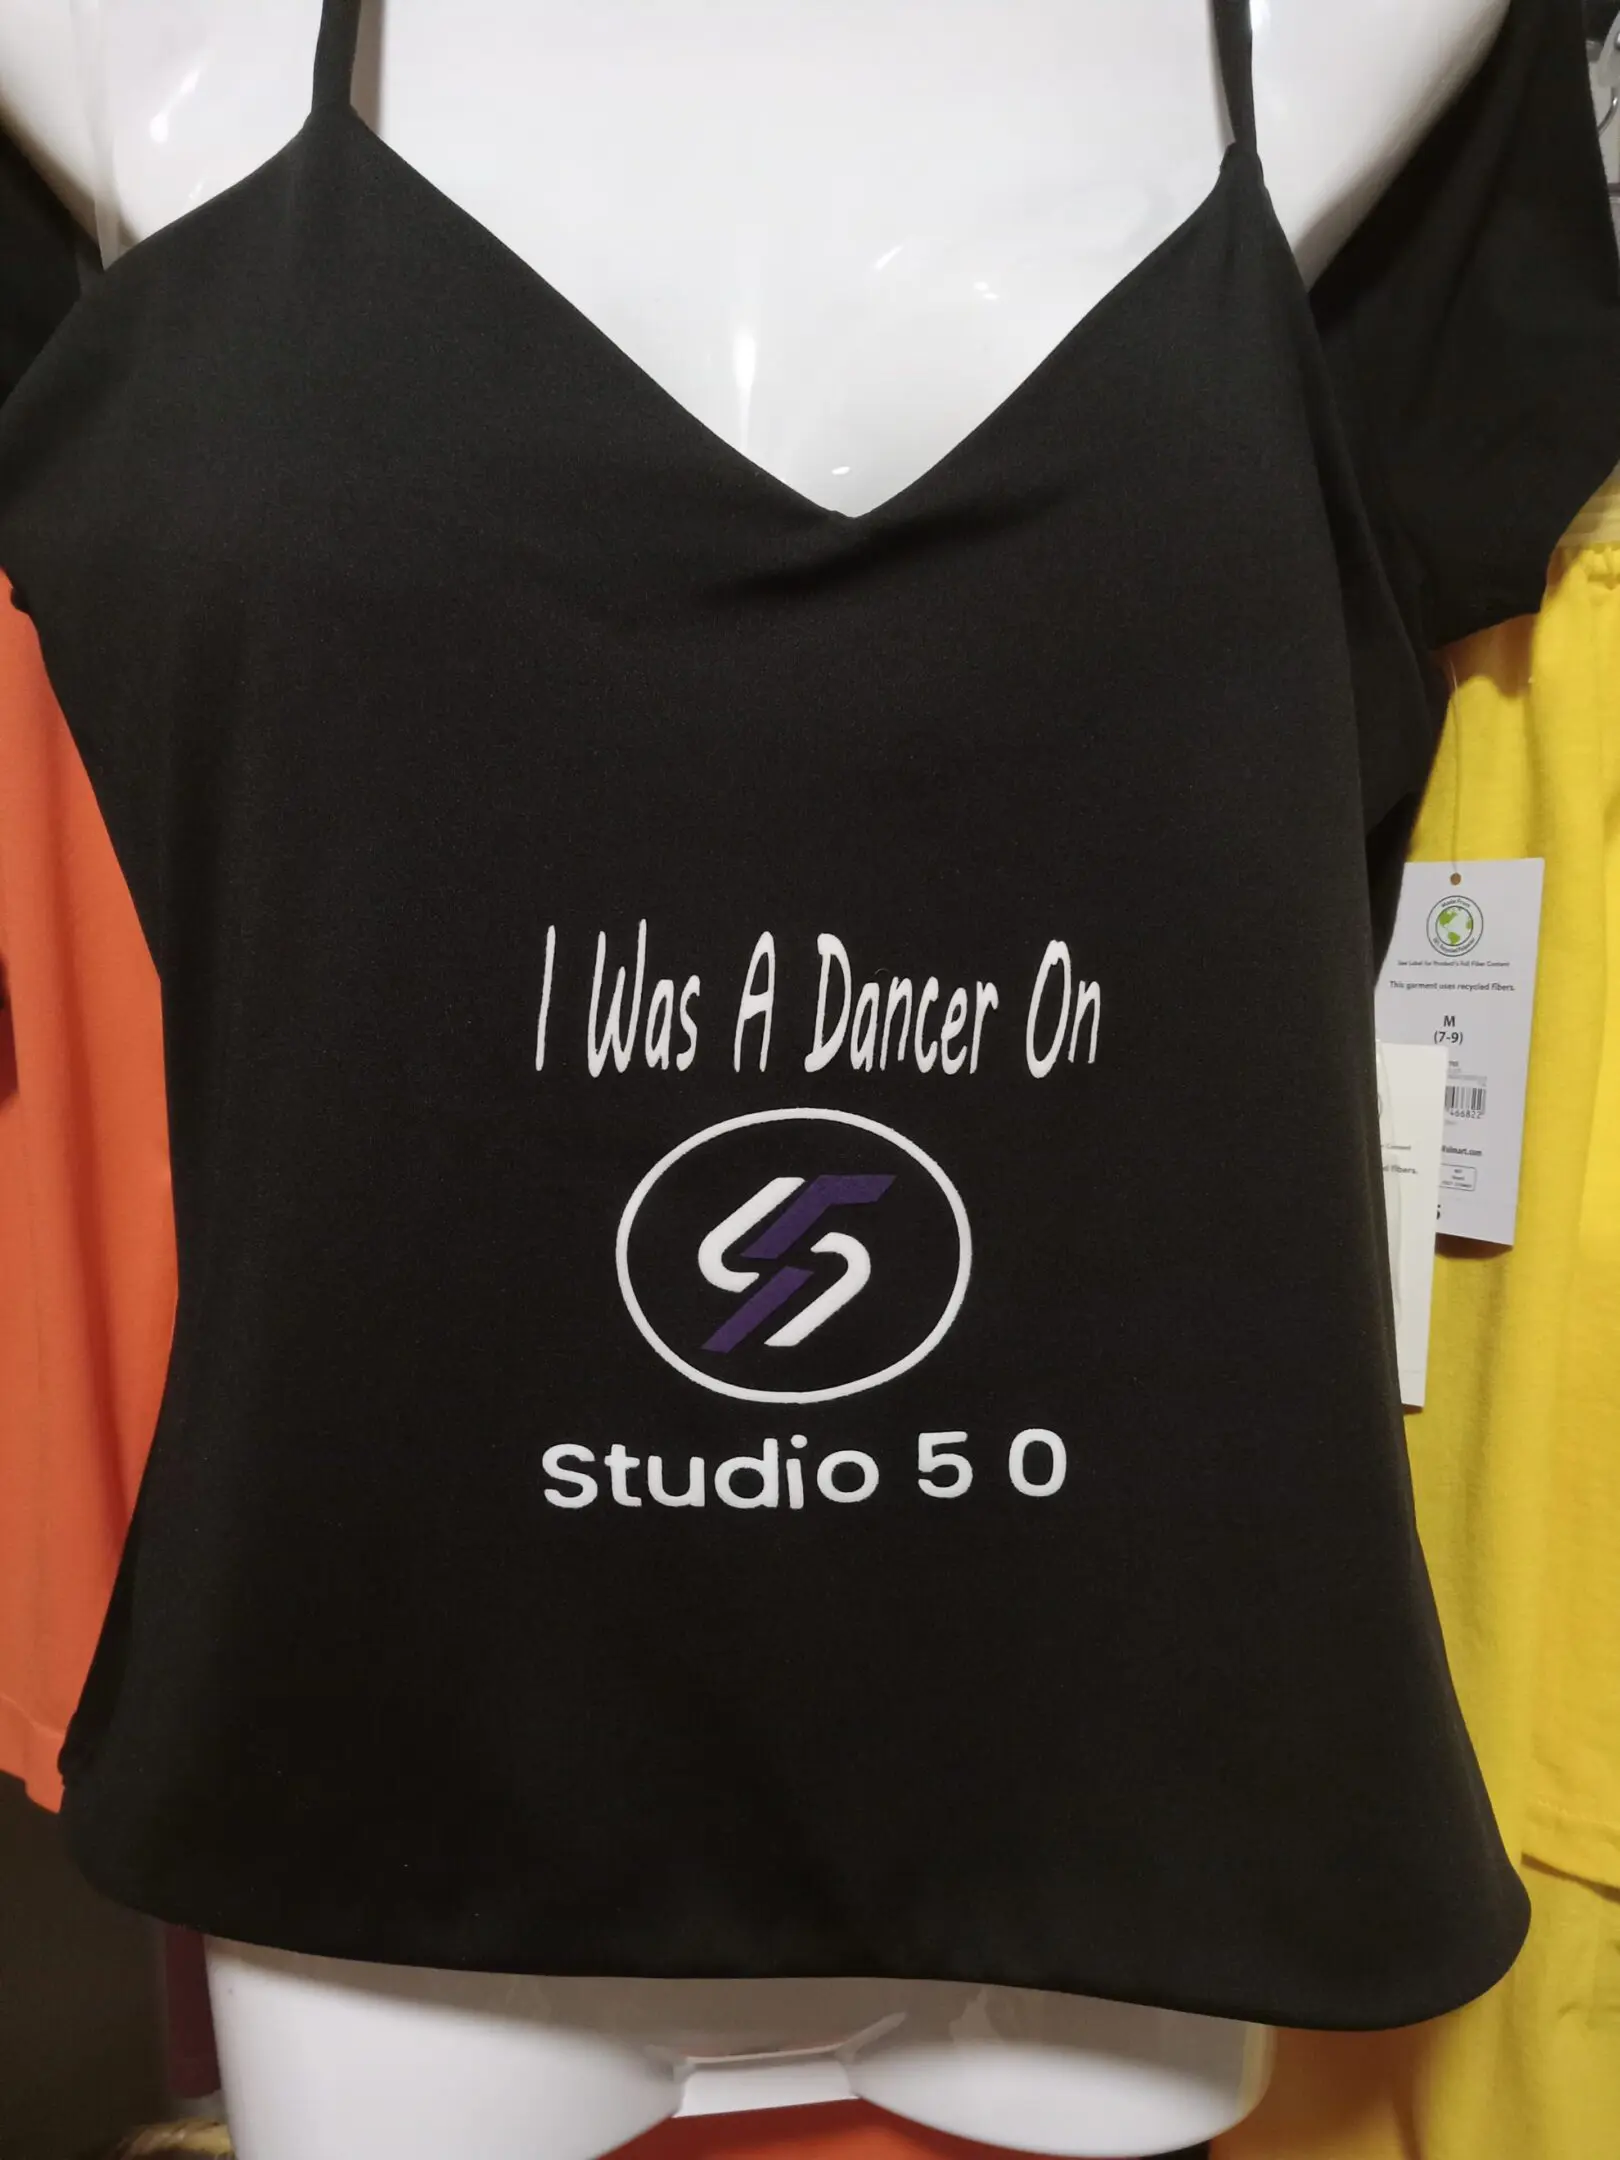 A black shirt with the words " i was a dancer on studio 5. 0 ".